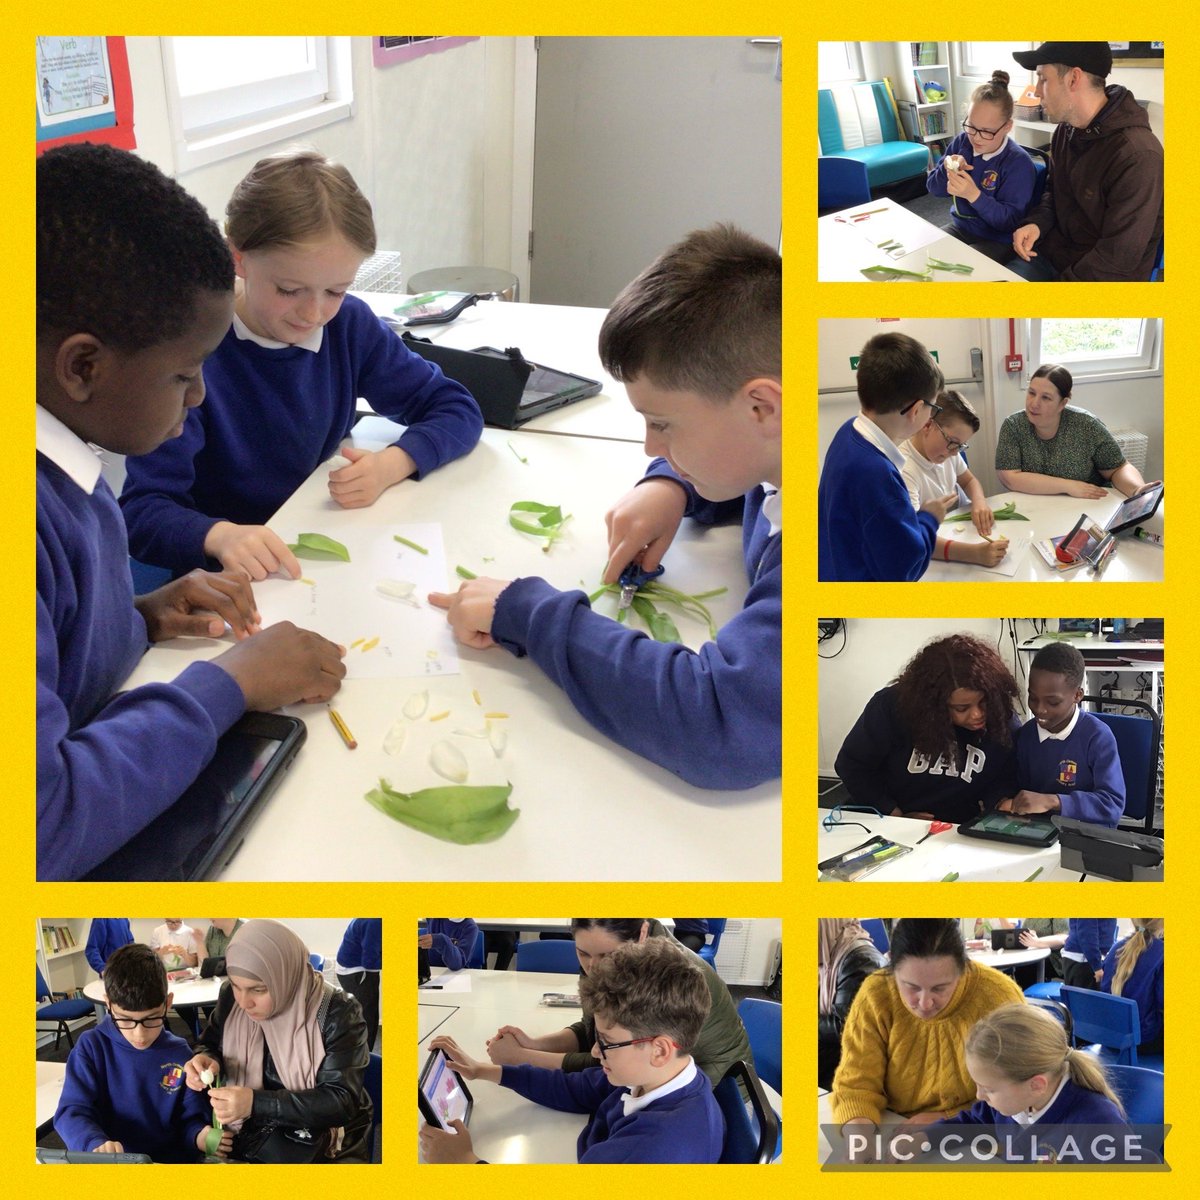 In Y5b, today’s science lesson was hands-on and fascinating! The children dived into the anatomy of tulips, dissecting and labelling with precision. Huge shoutout to the amazing parents who joined in to make it an enriching experience! 🌷🔬 @CNicholson_Edu @AETAcademies